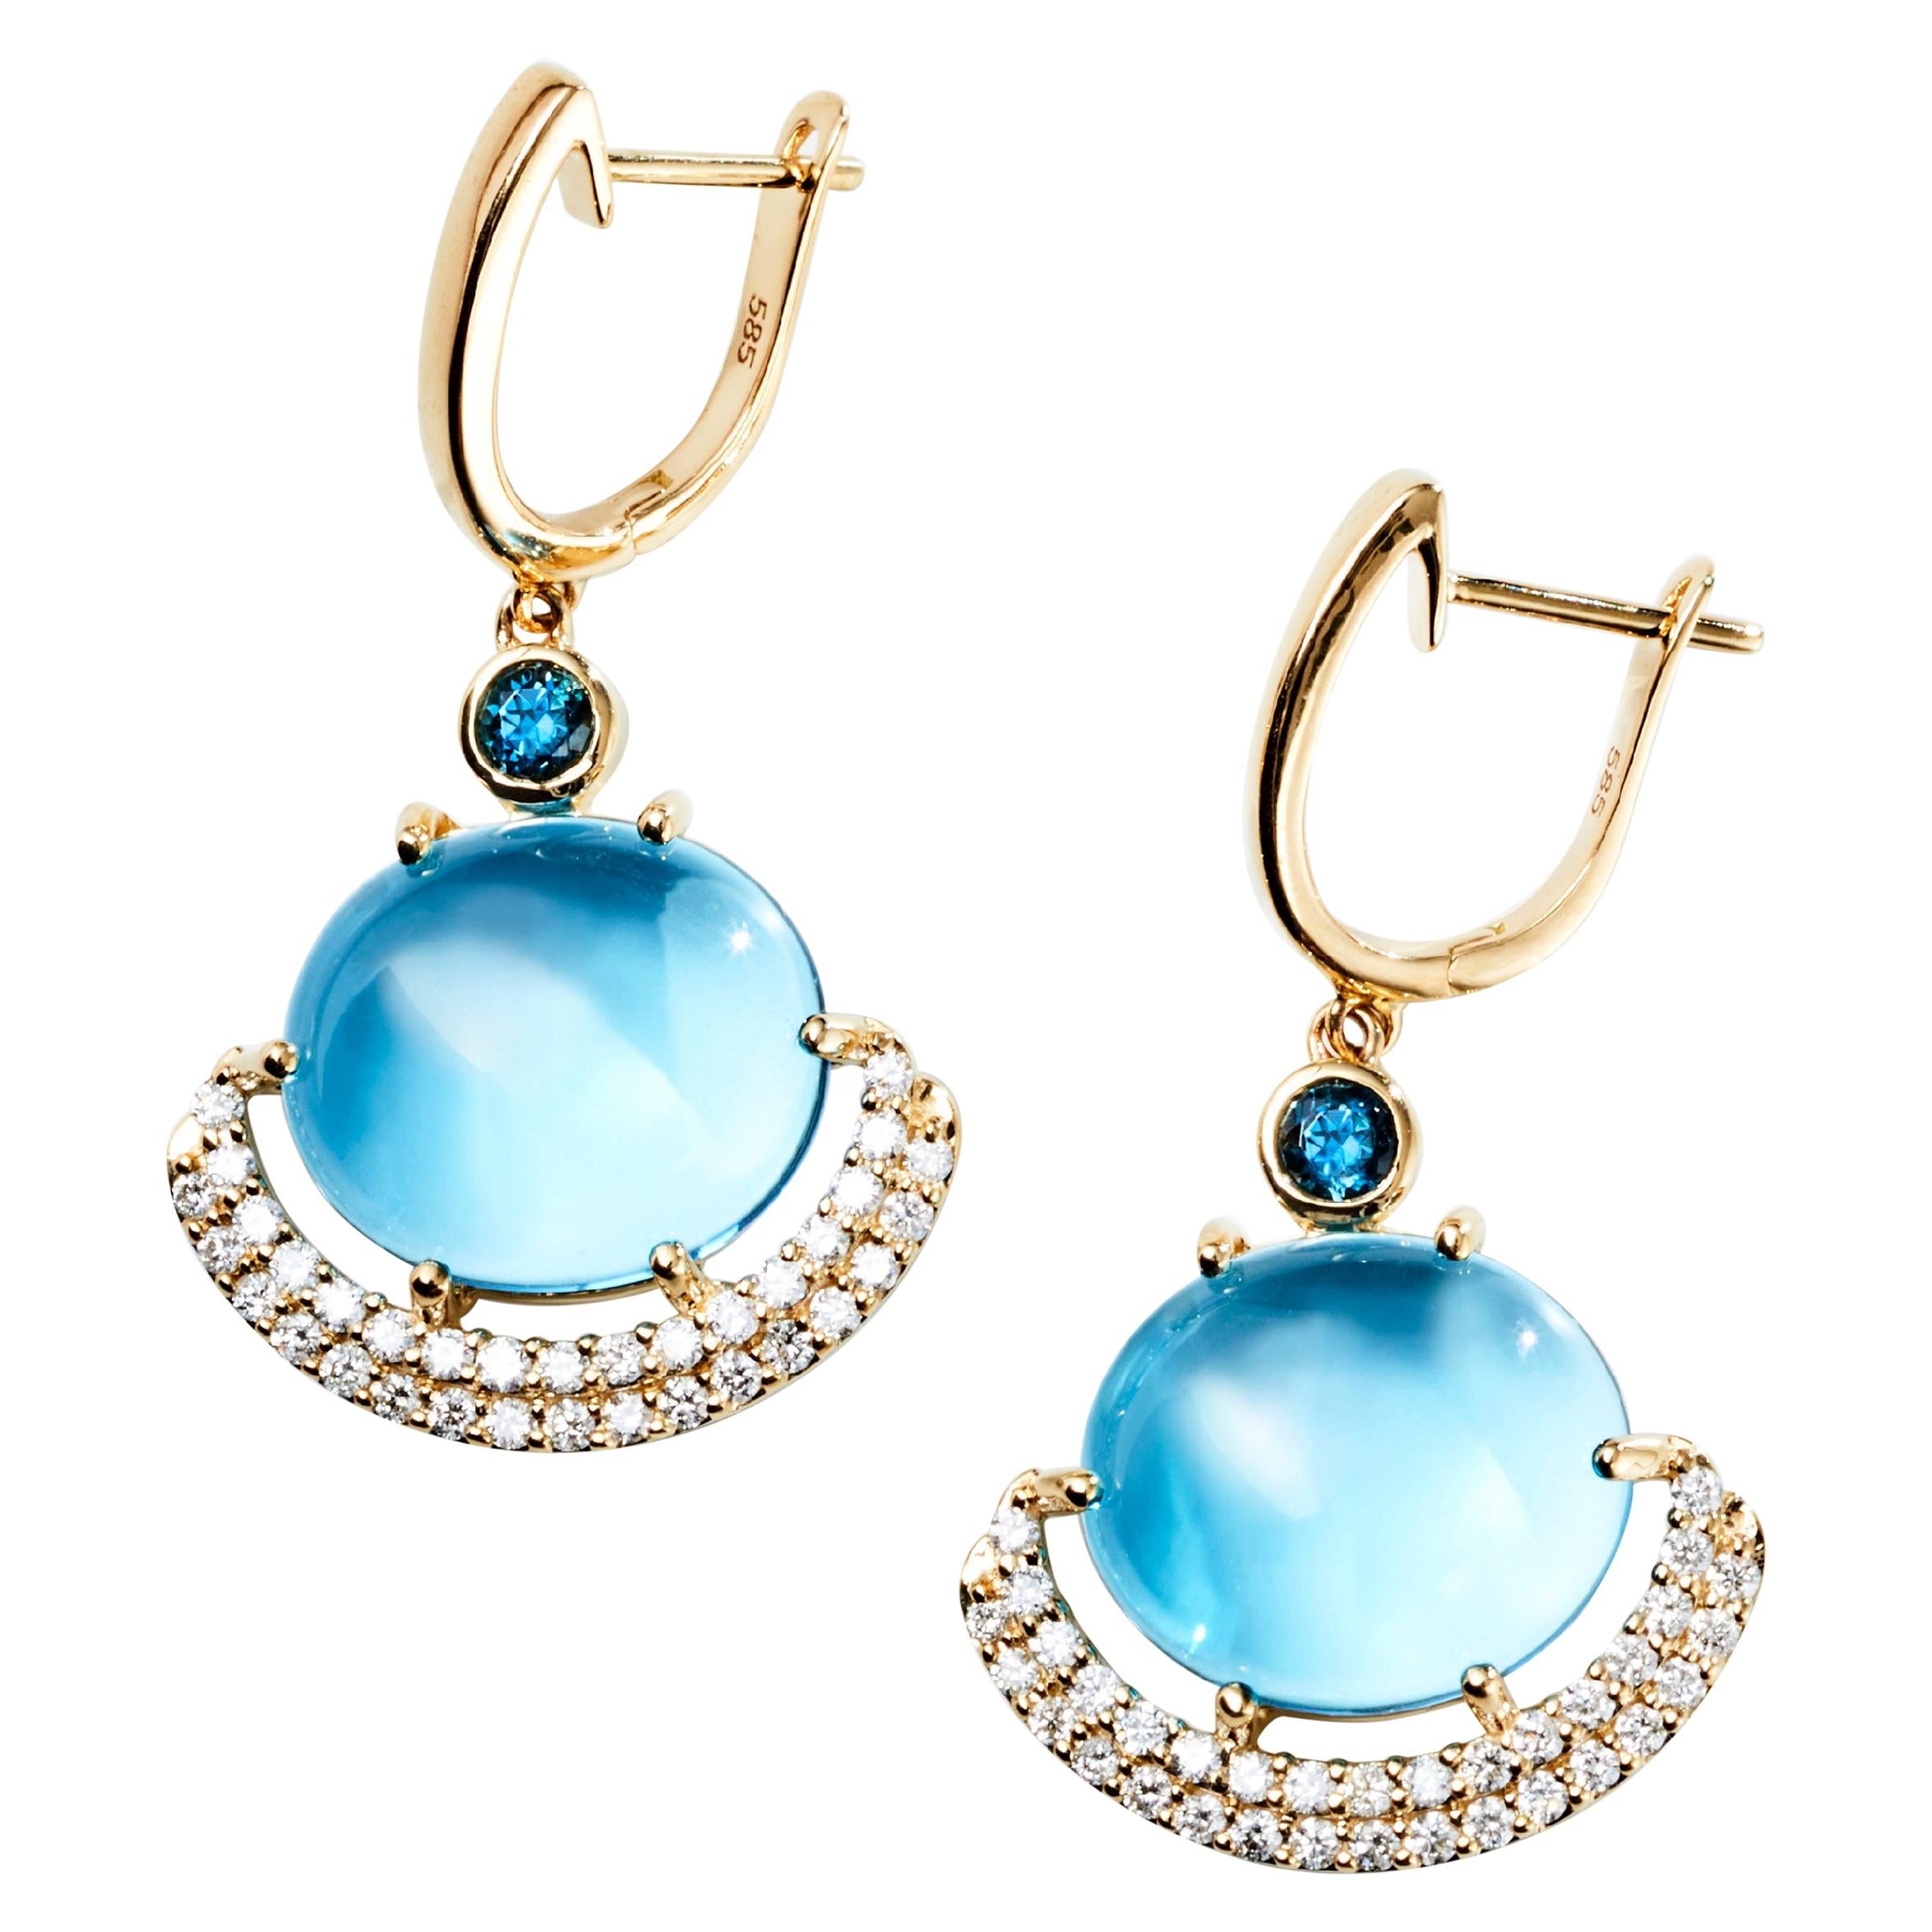 Eclipse Earrings in 14 Karat with Swiss and London Blue Topaz with Diamonds